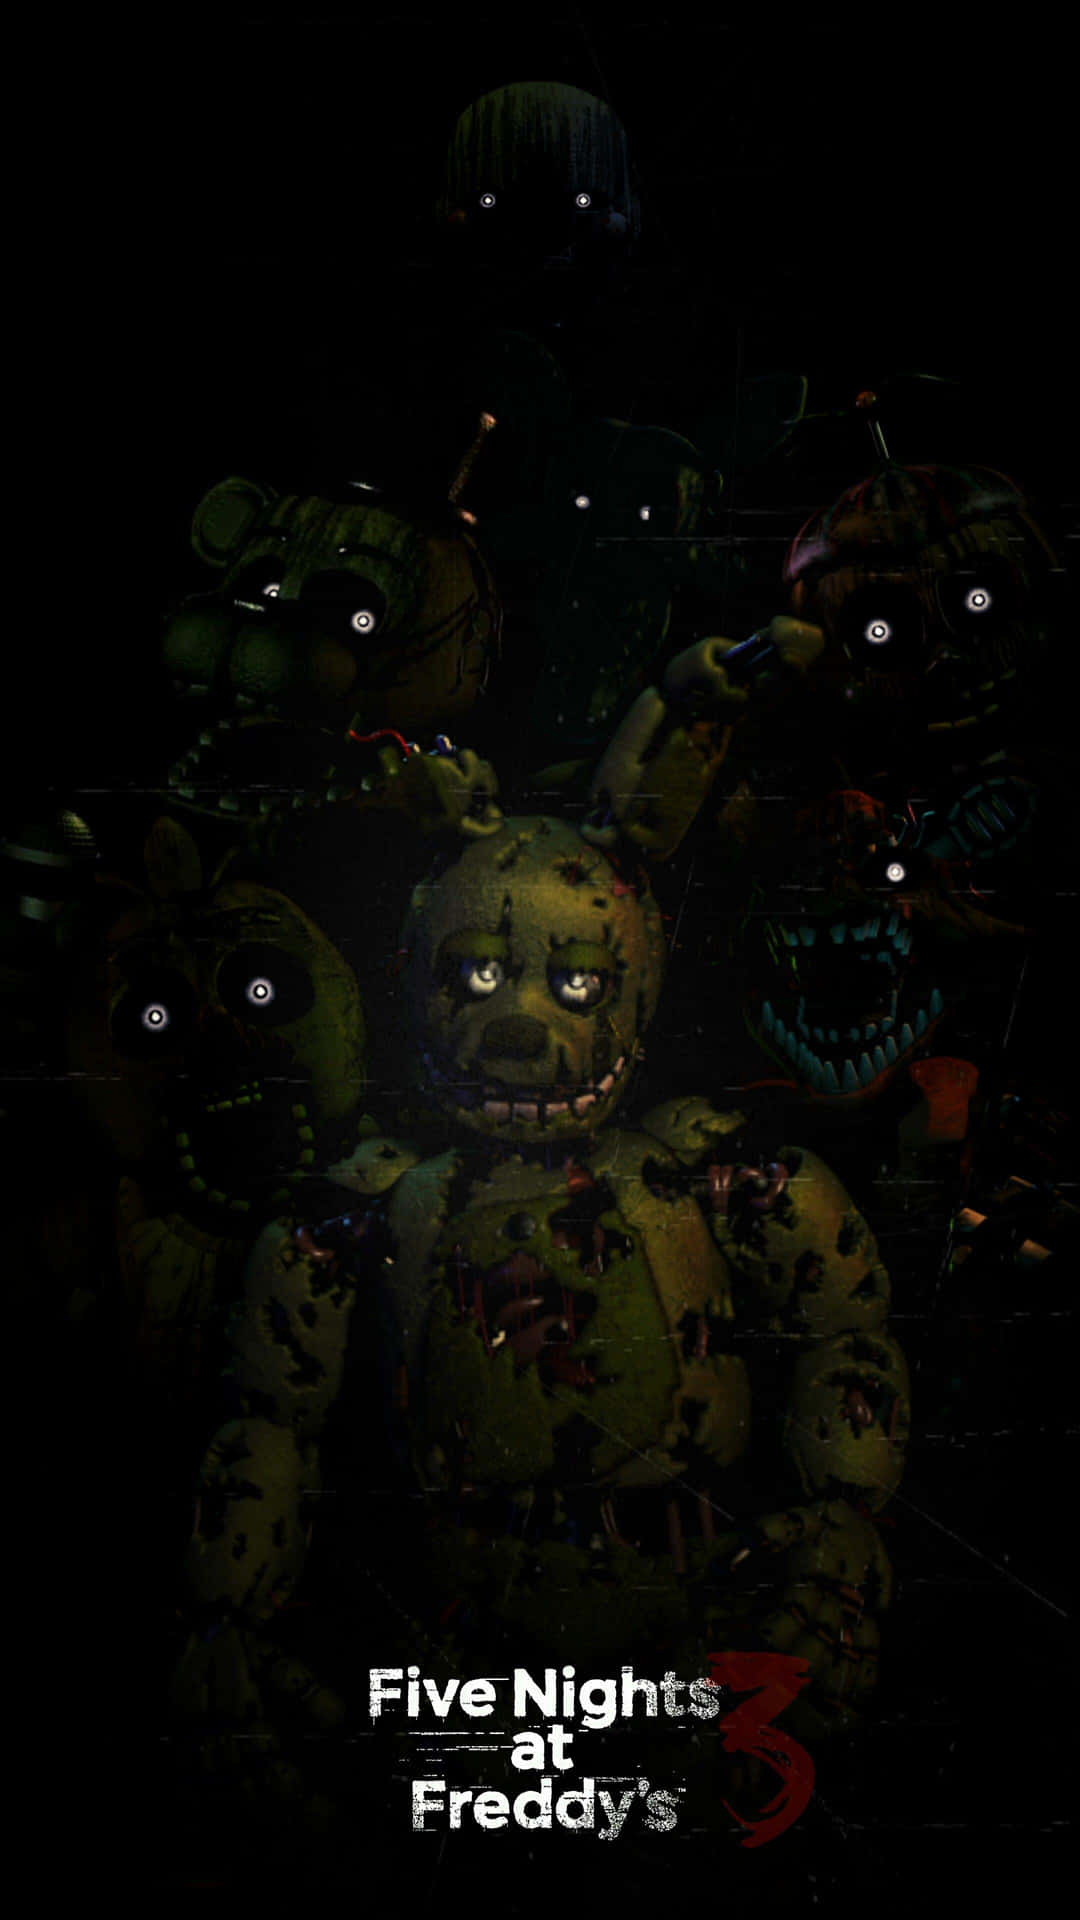 Survive Five Nights at Freddys on your iPhone Wallpaper